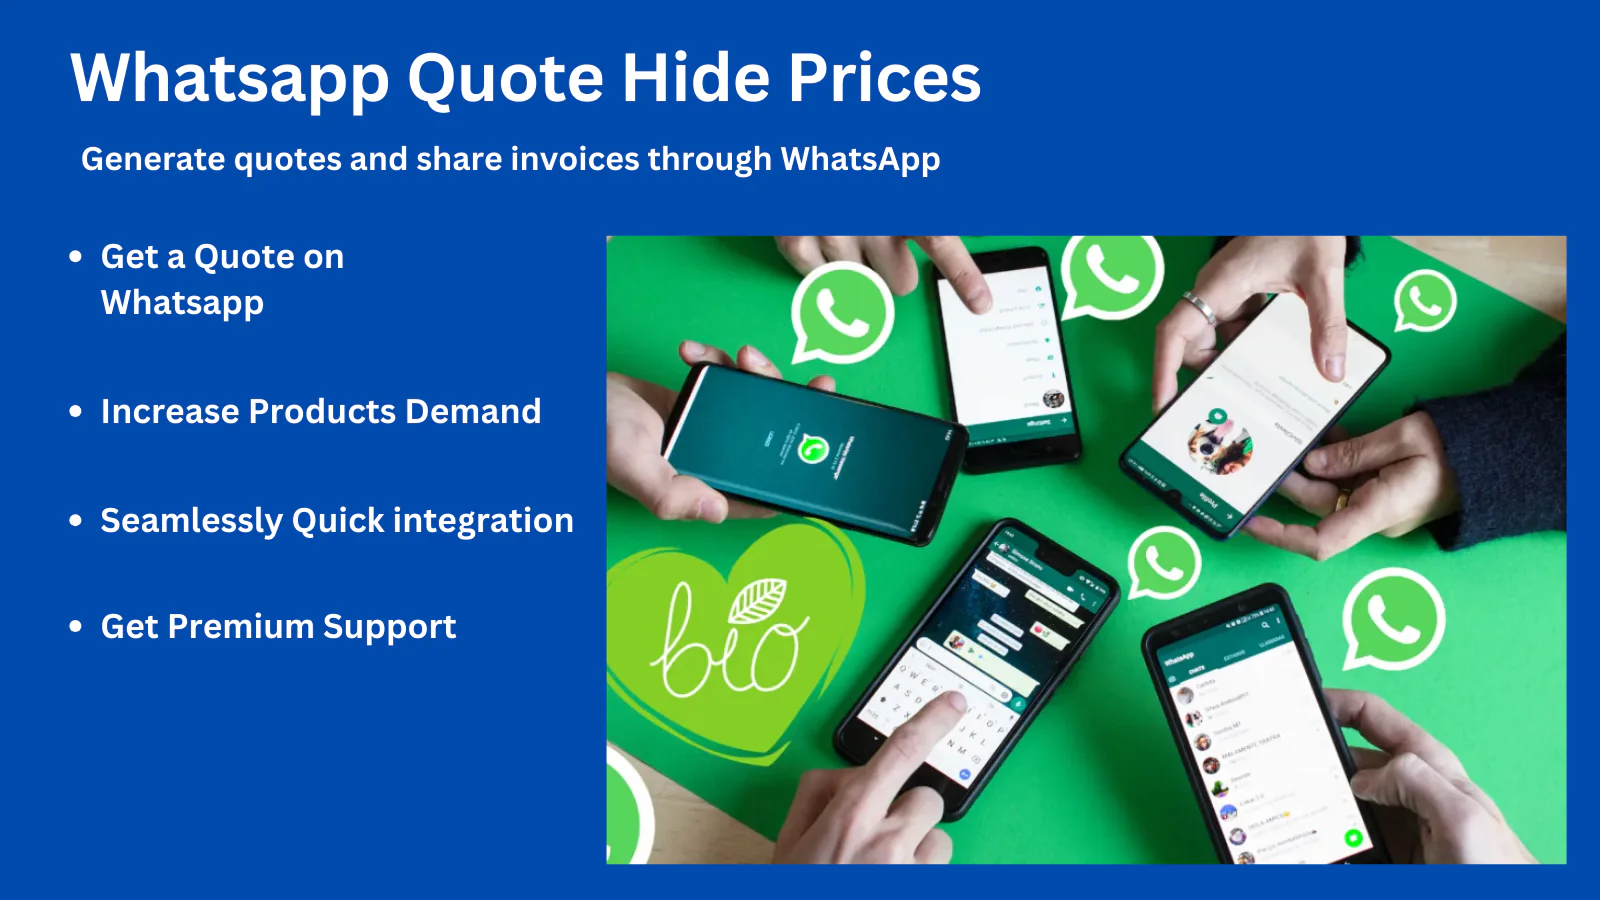 Whatsapp Quote and Hide Prices